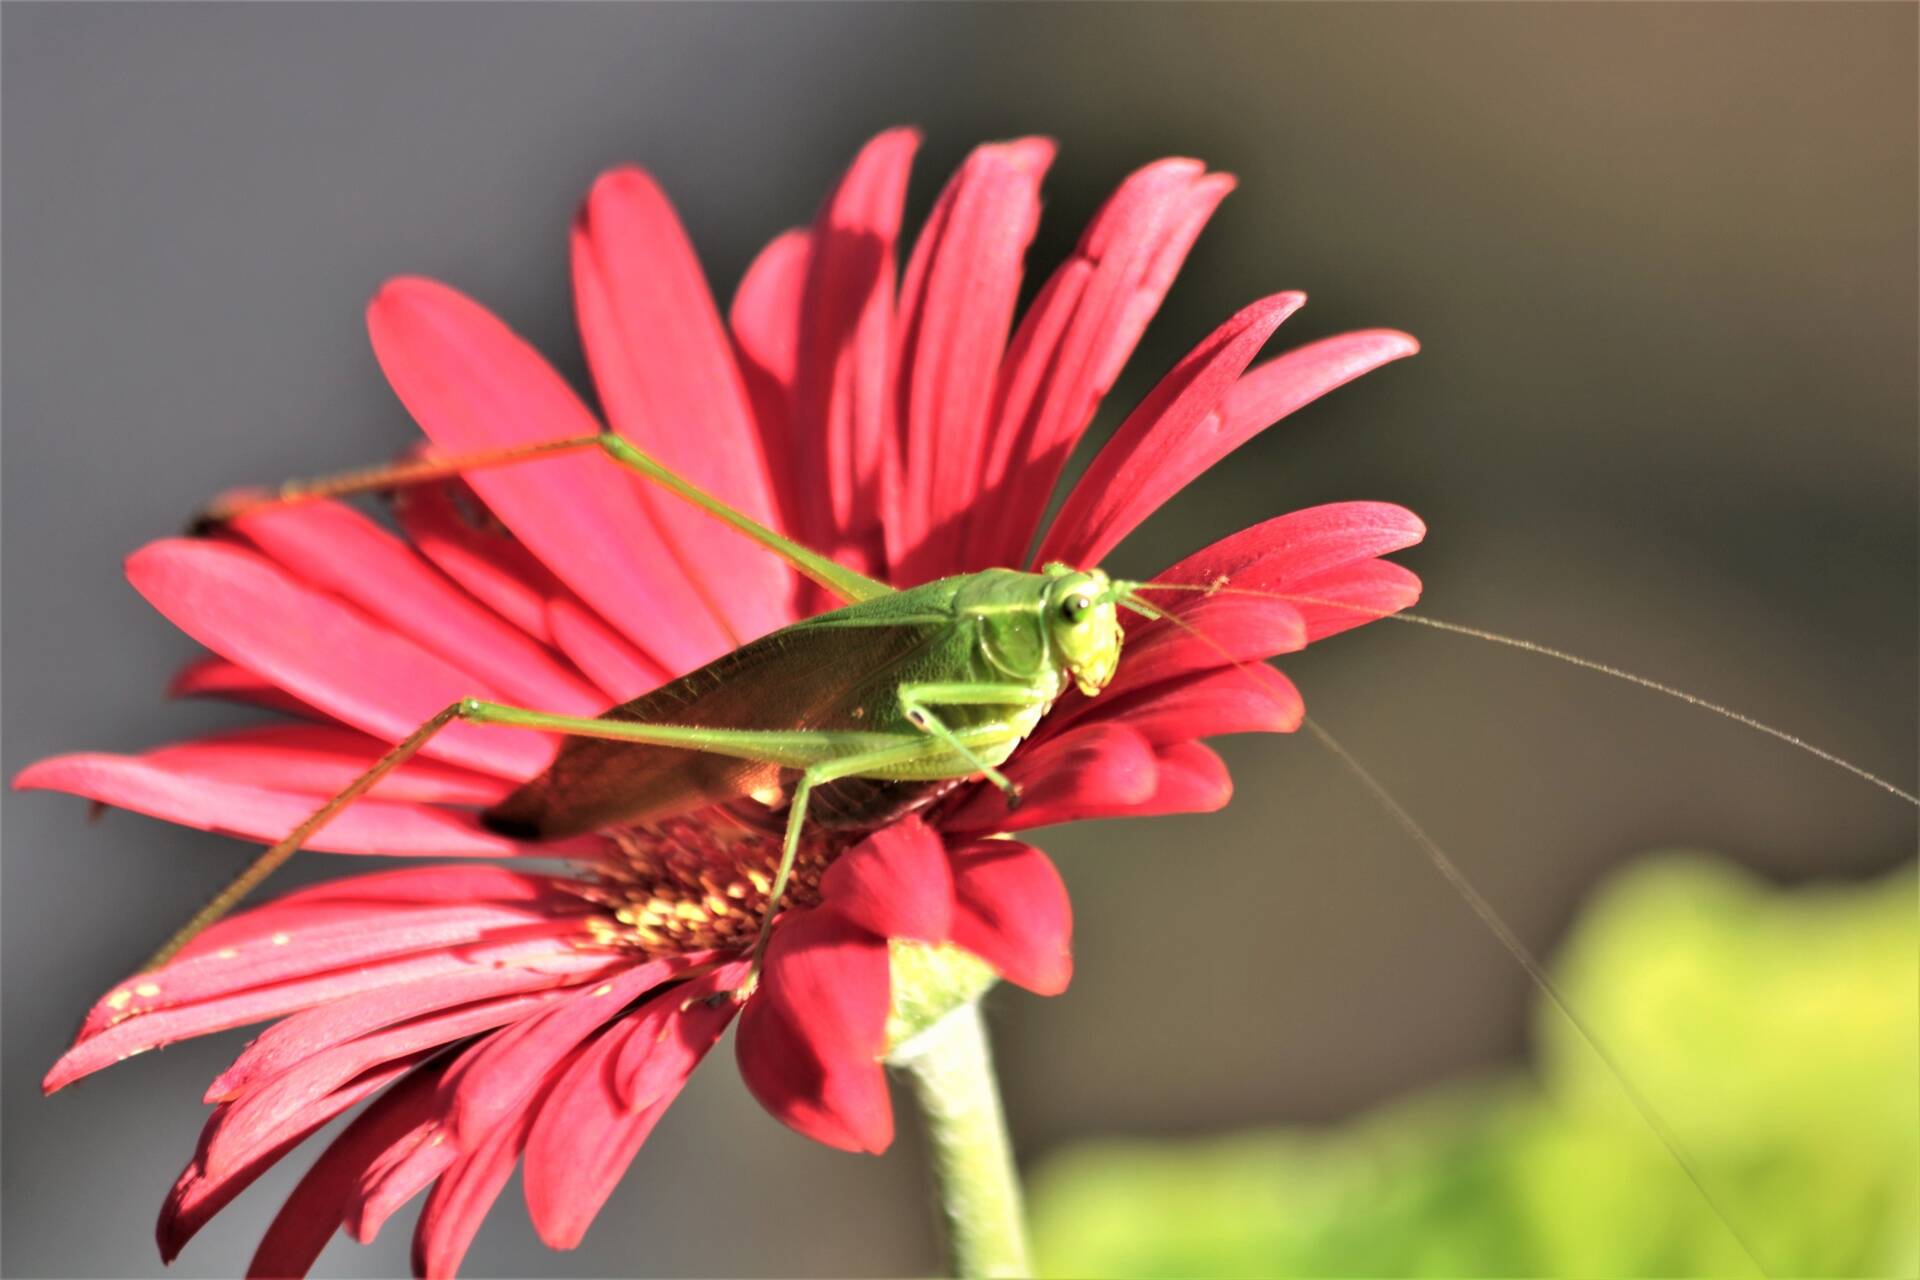 This public domain image shows a katydid on a red flower. Insects such as katydids make sounds people can hear, but they also make vibrational signals that indicate body size, and females prefer larger males. (Sheila Brown)